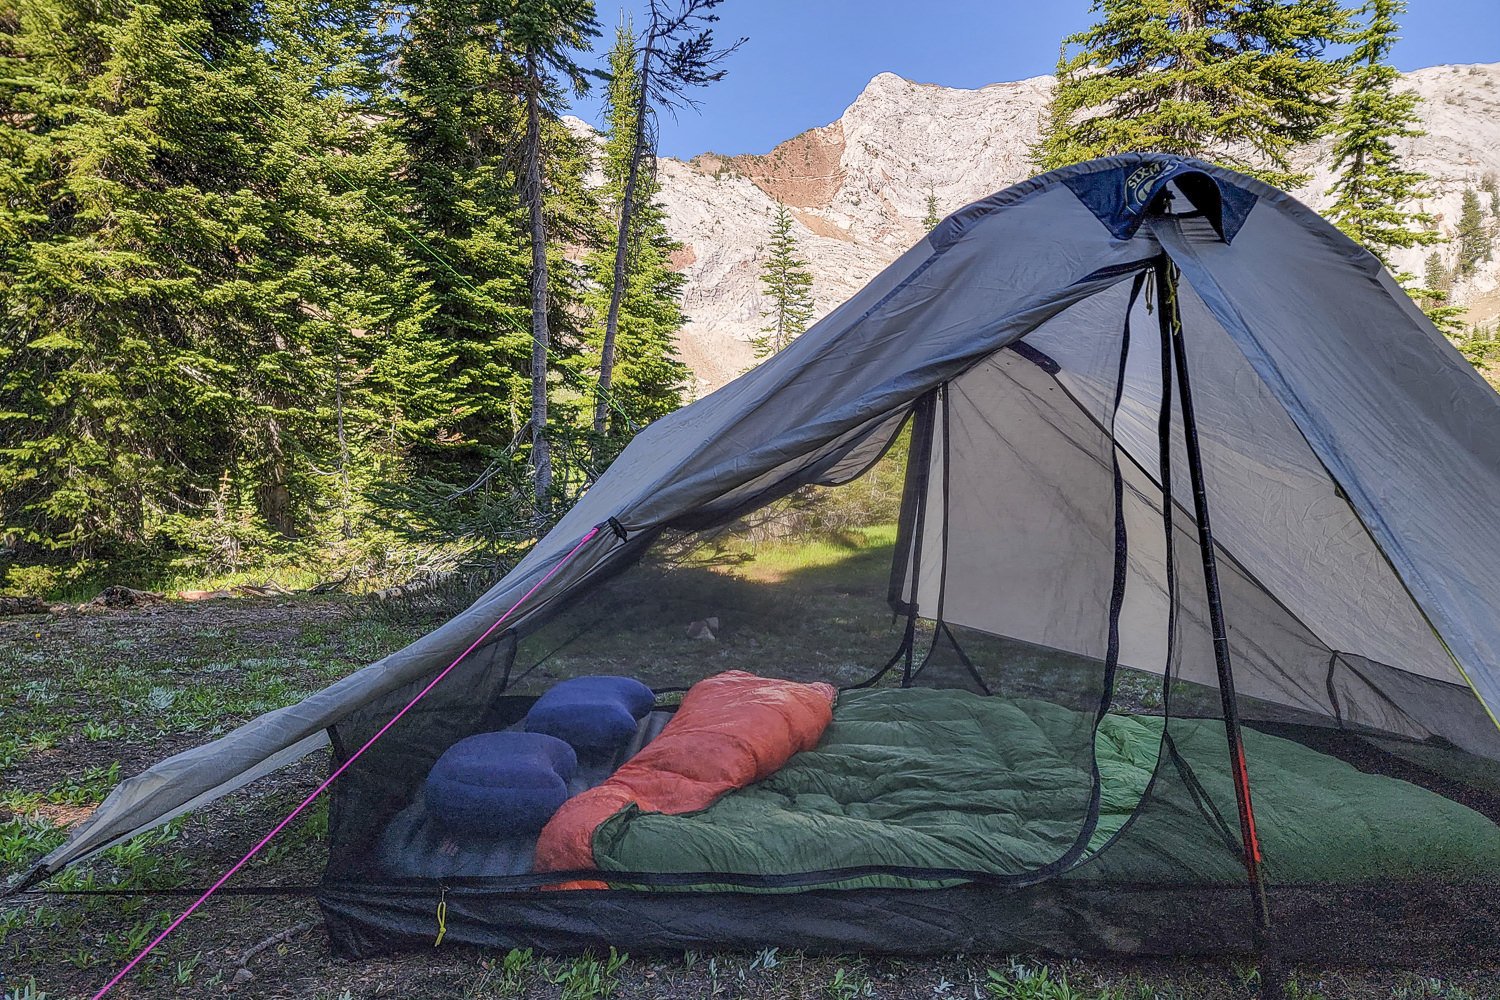 The Enlightened Equipment Accomplice in a backpacking tent